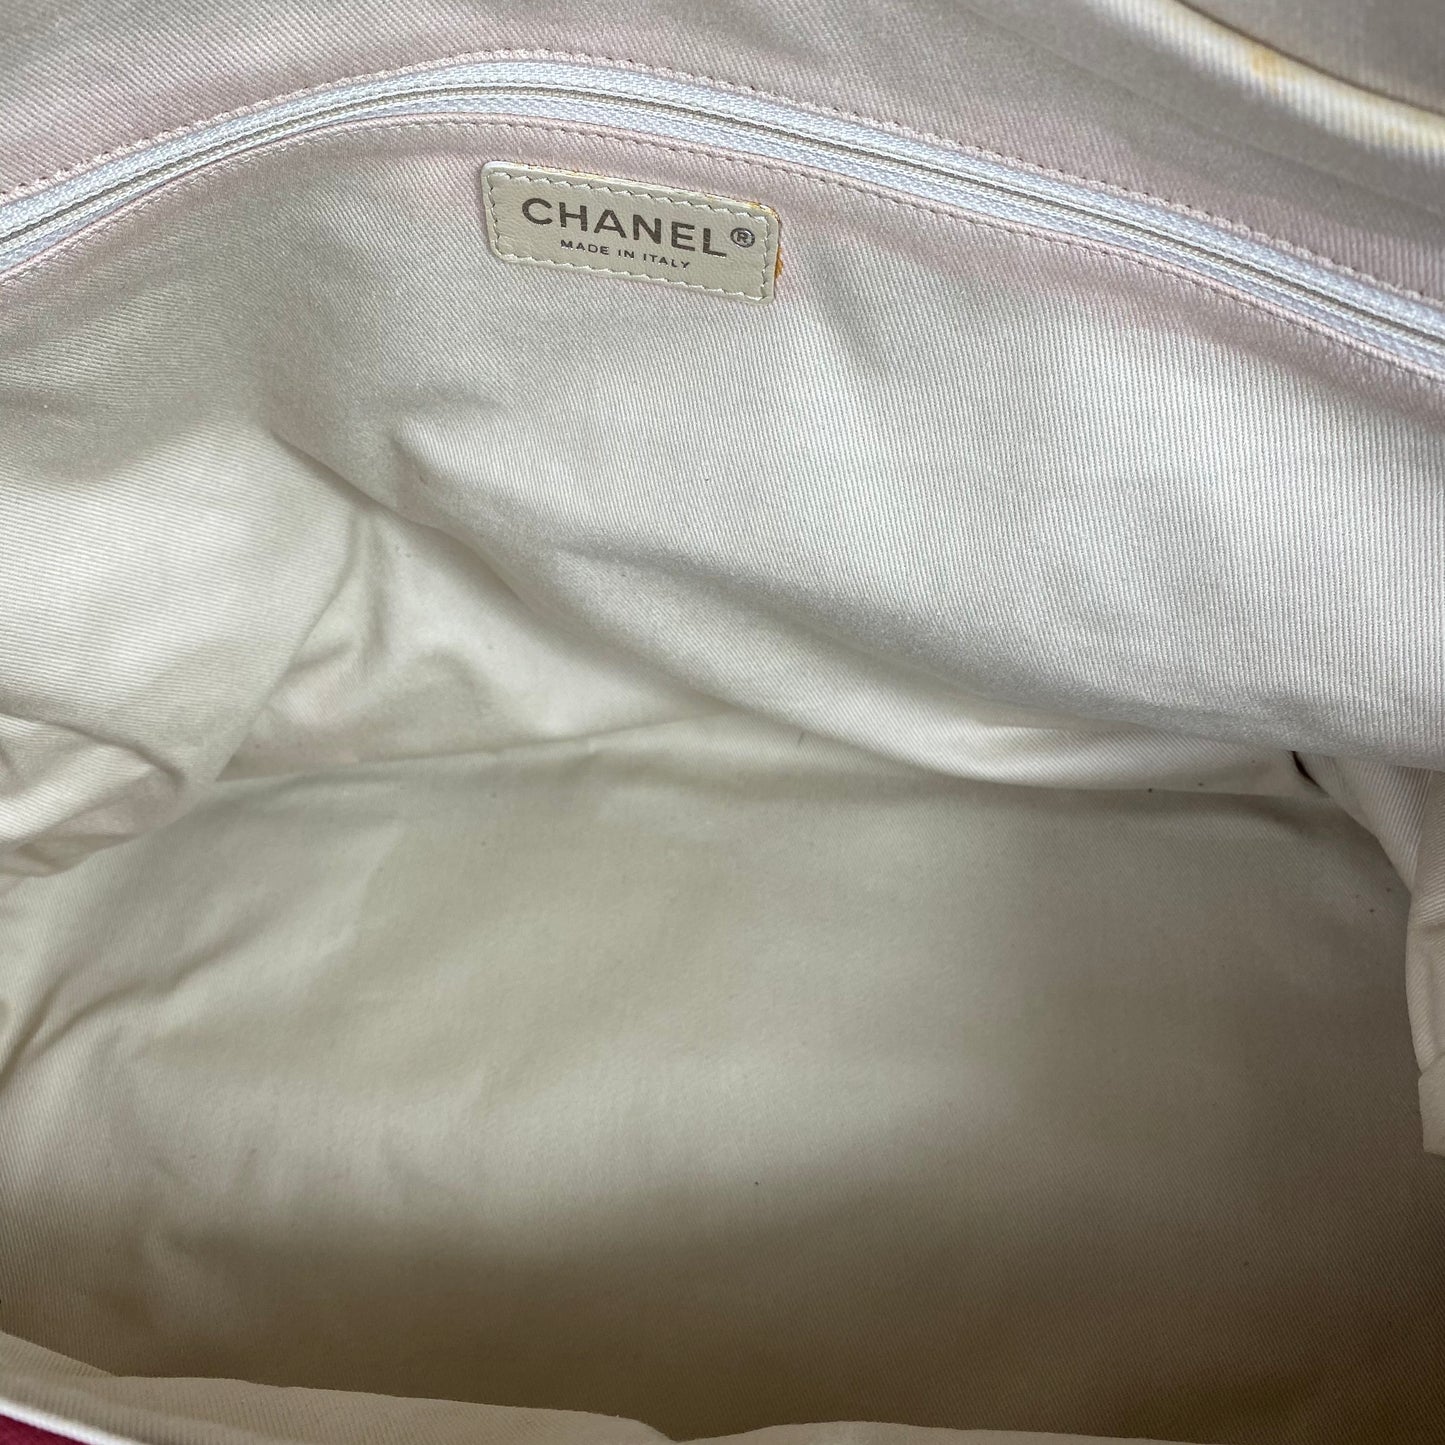 Chanel Large Leather CC Travel Bag